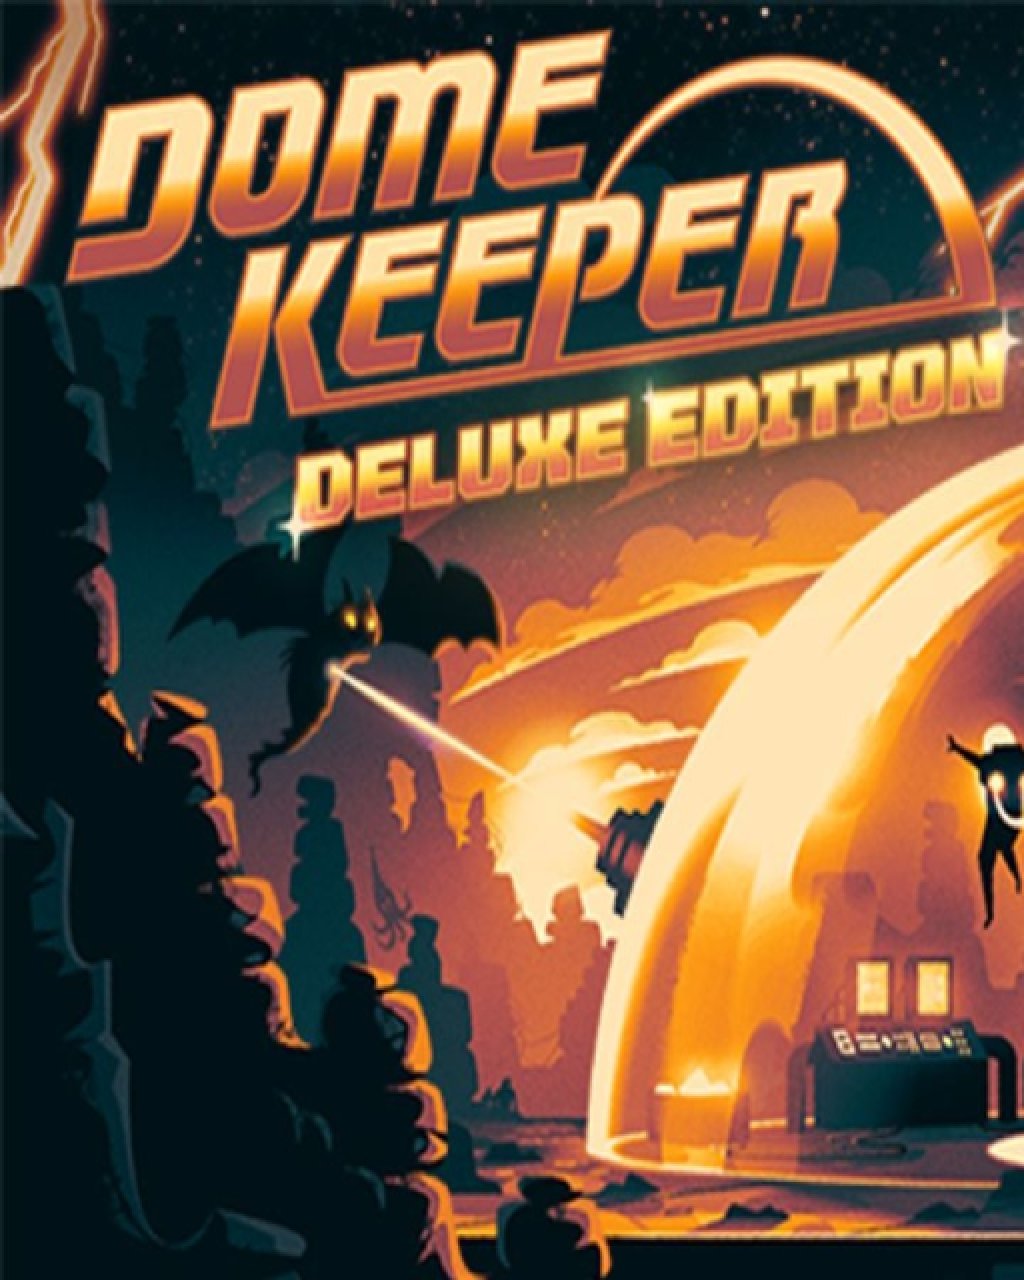 ESD Dome Keeper Deluxe Edition